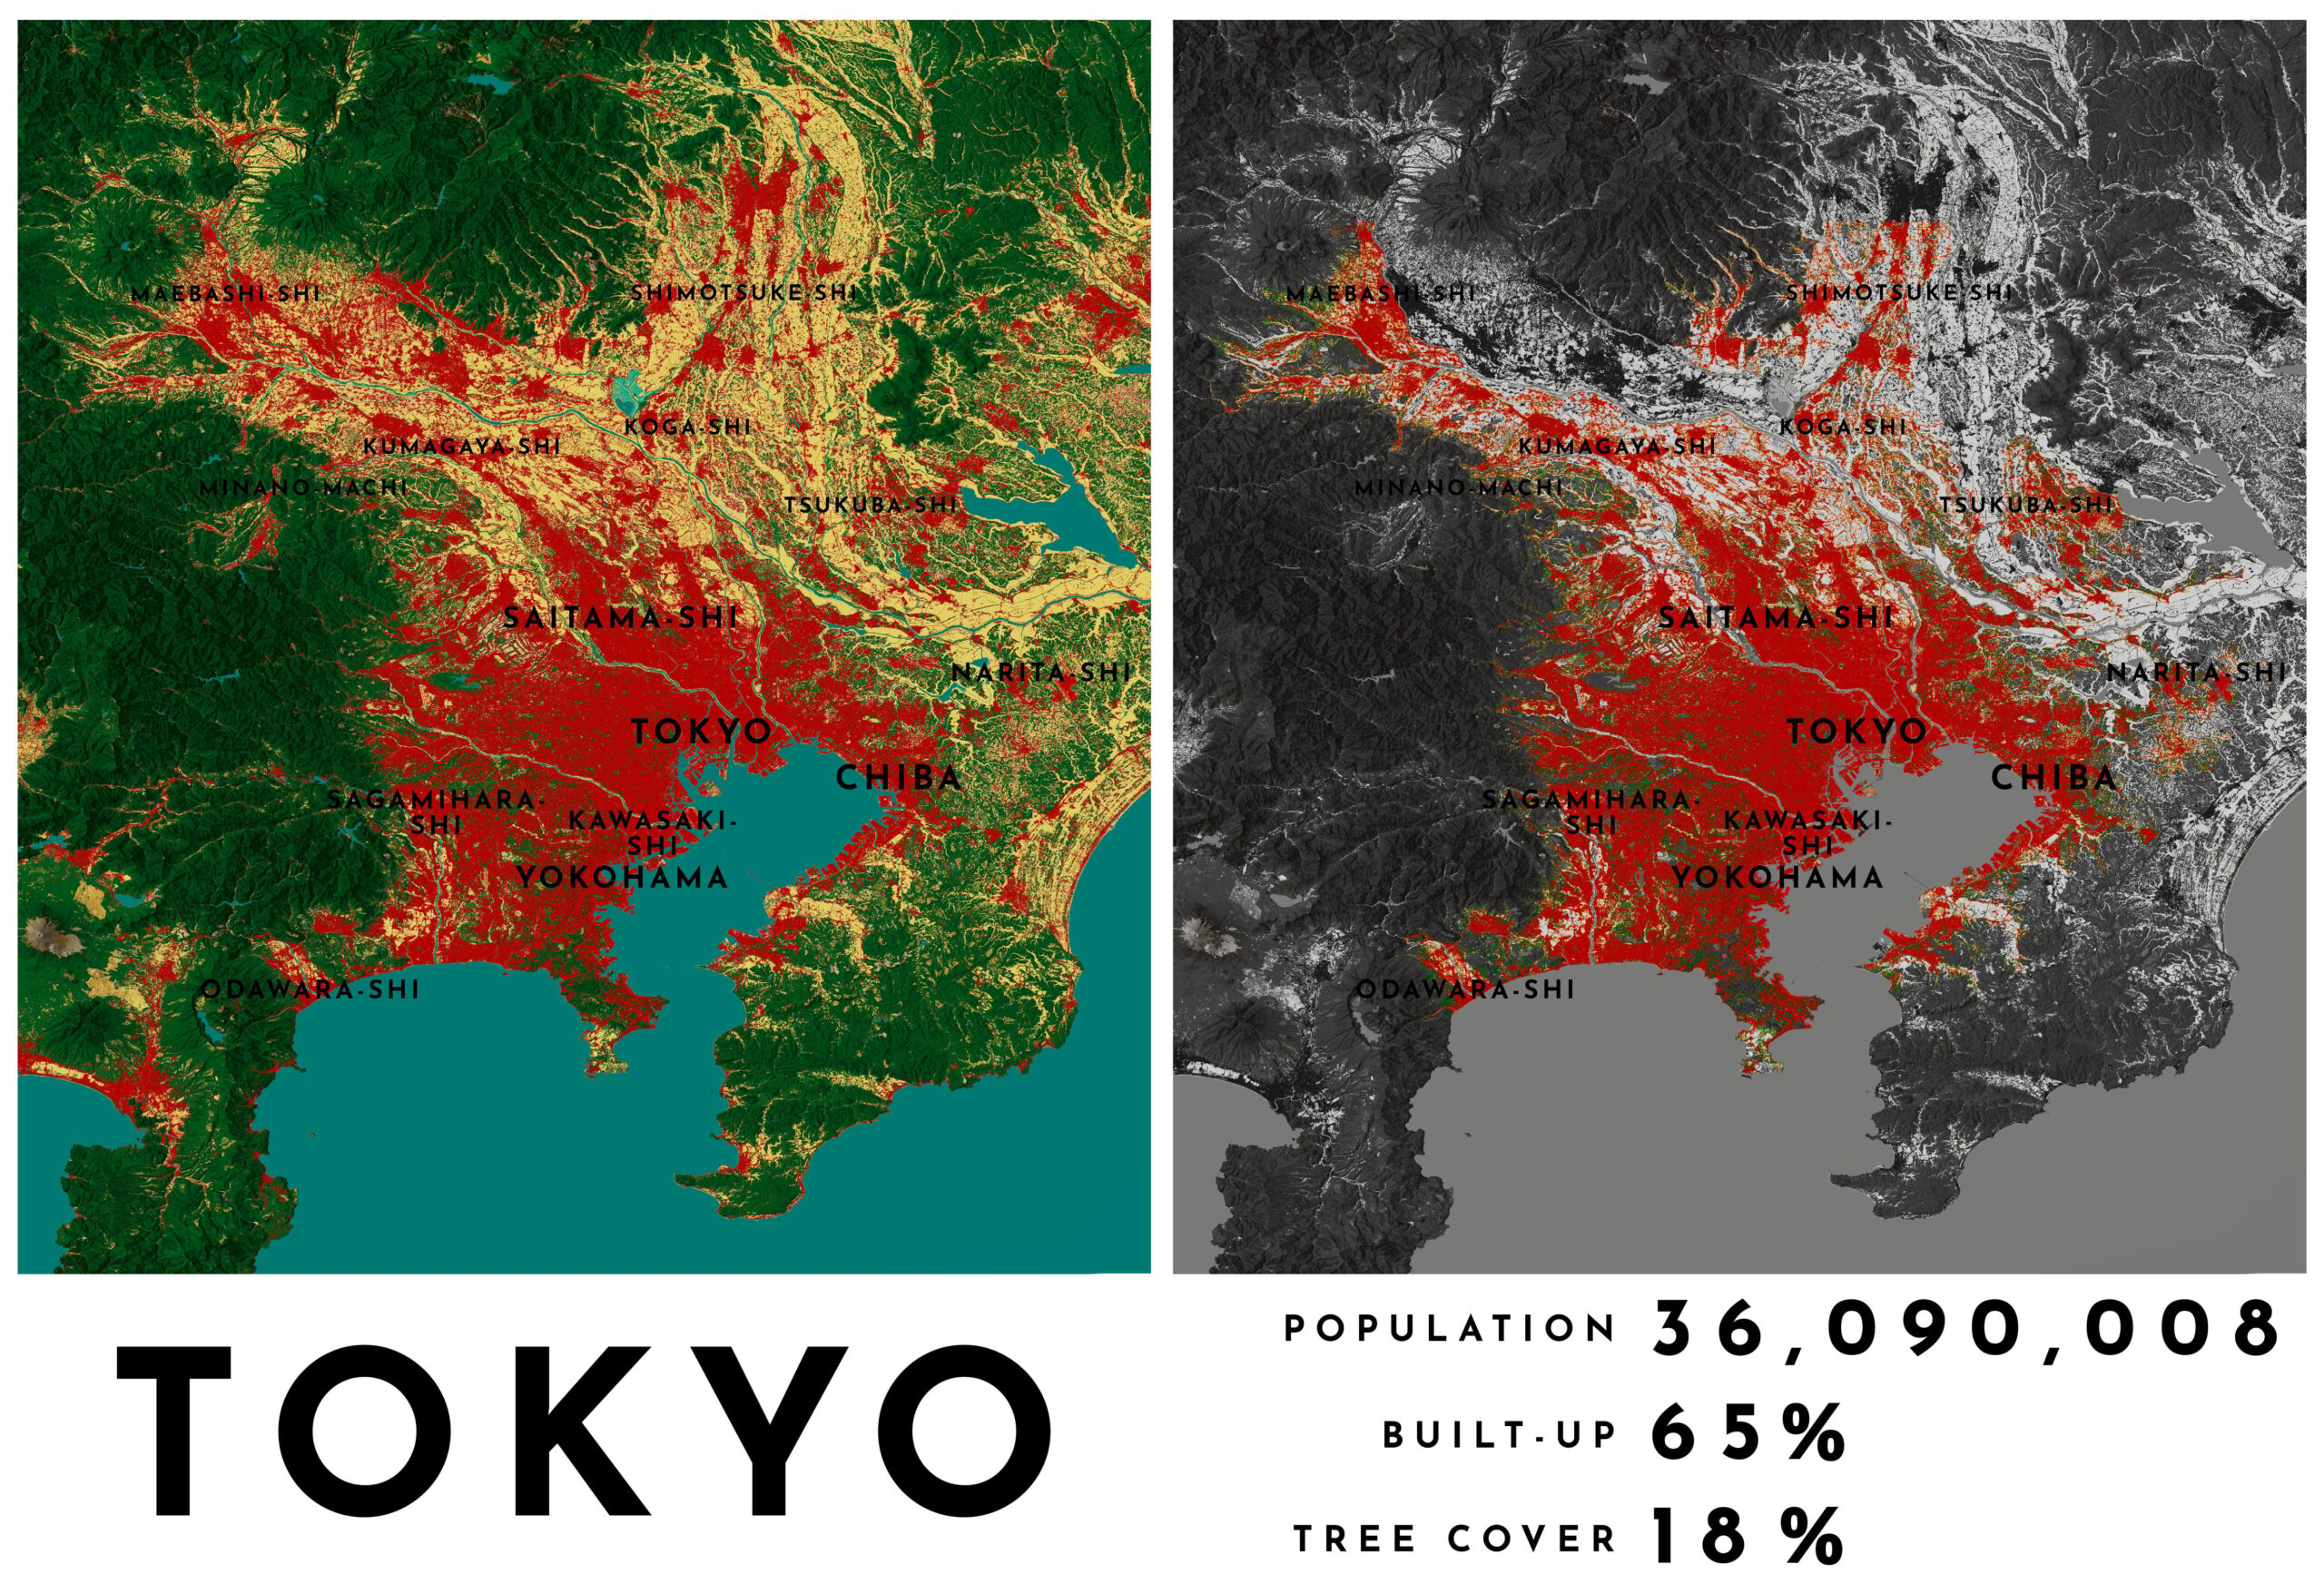 Map showing the city with results of population, built-up, and tree cover.